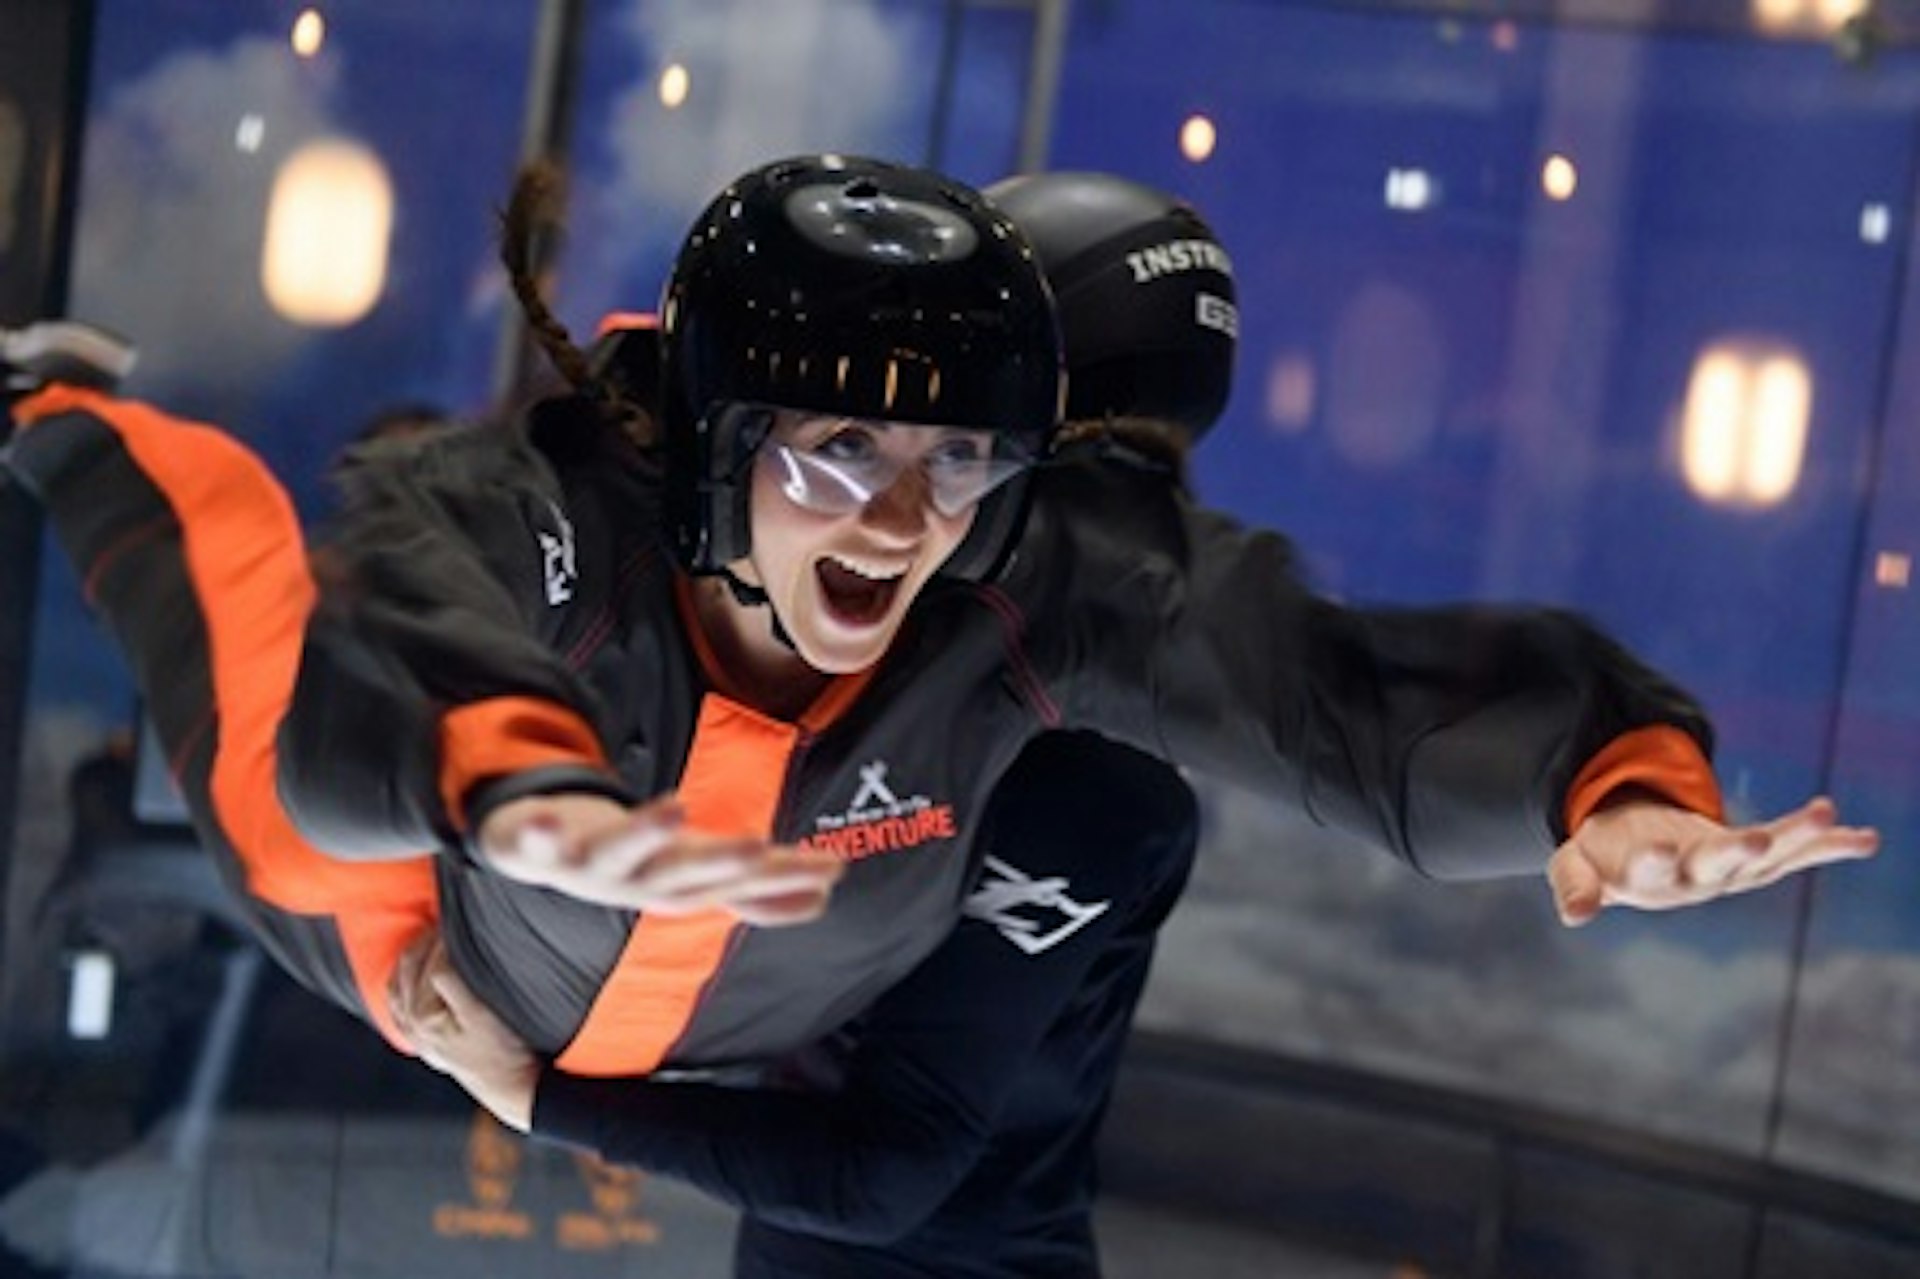 iFly Indoor Skydiving and High Ropes at The Bear Grylls Adventure 2